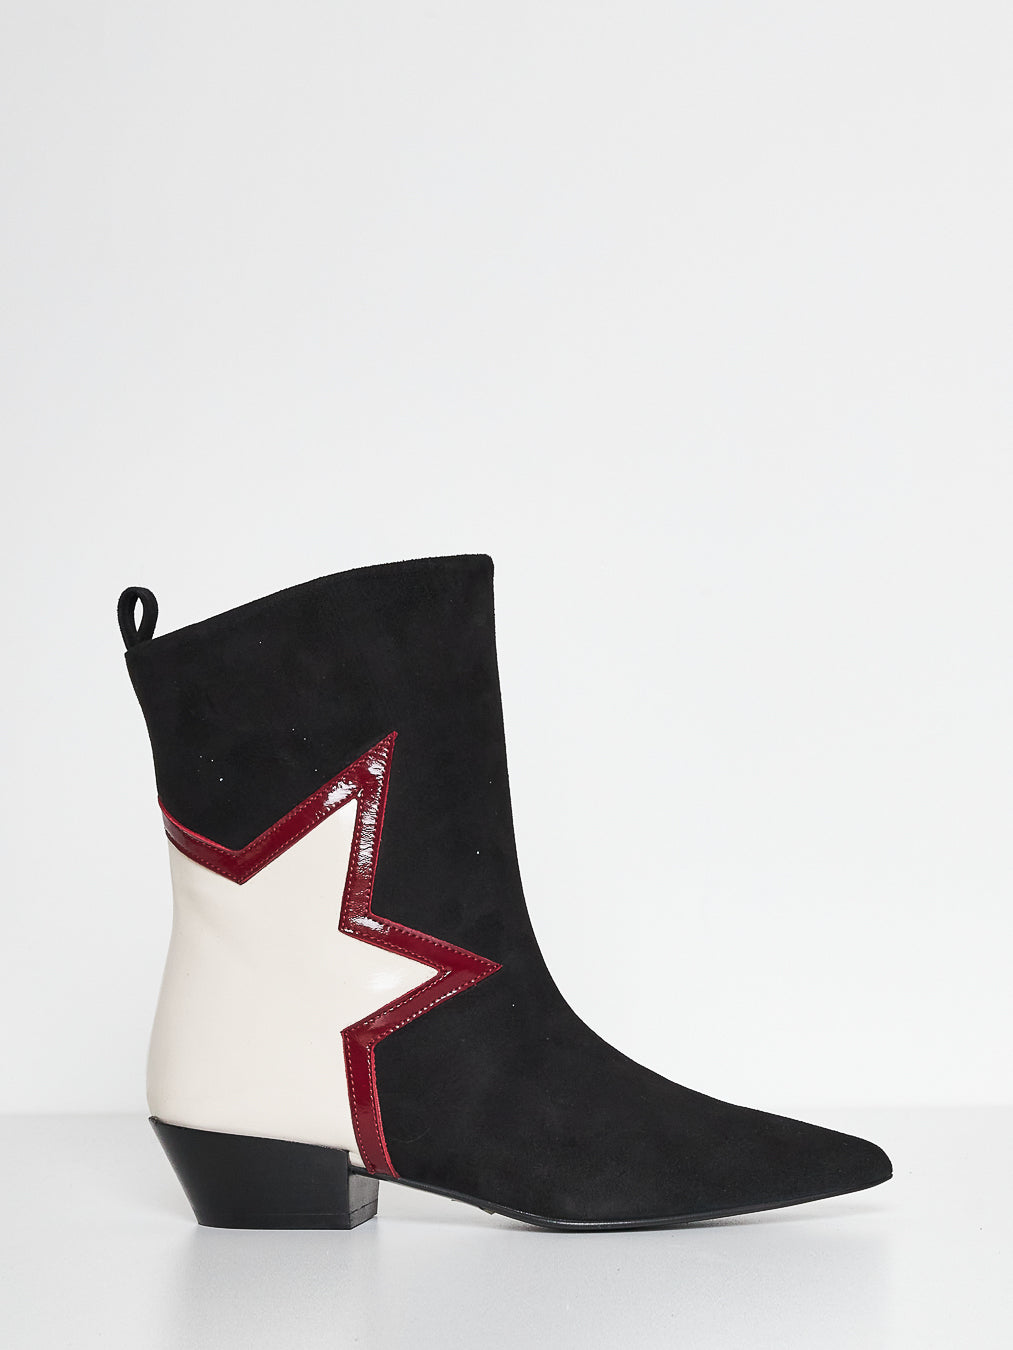 Marc Ellis MT 257 black suede ankle boots with star